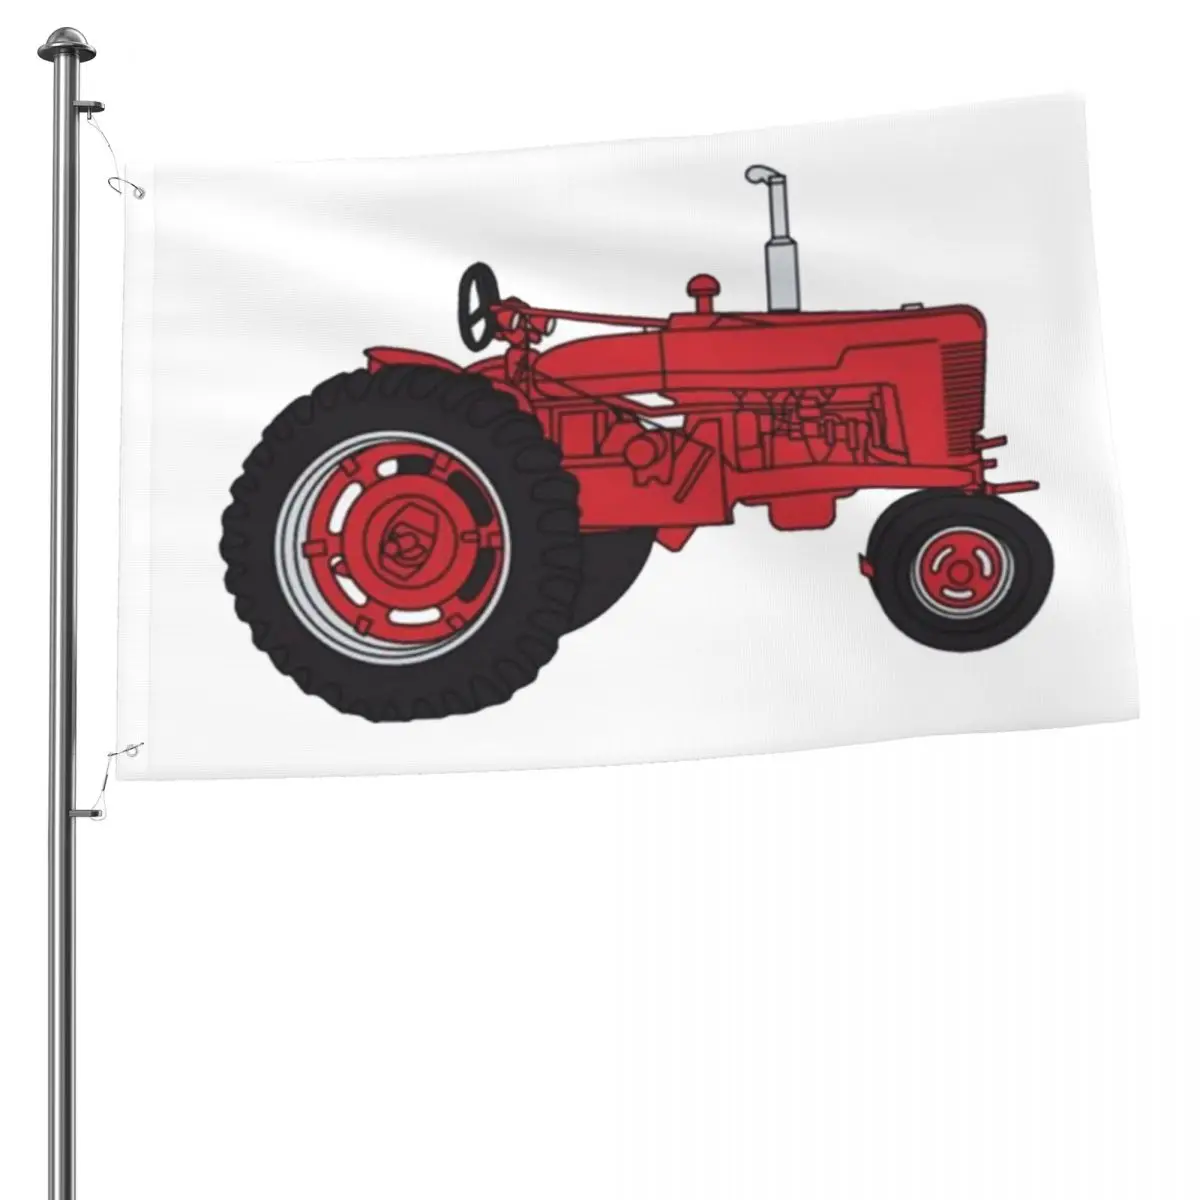 

Red Tractor Outdoor Flag Decorative Banners For Home Decor House Yard Outdoor Party Supplies 2x3ft